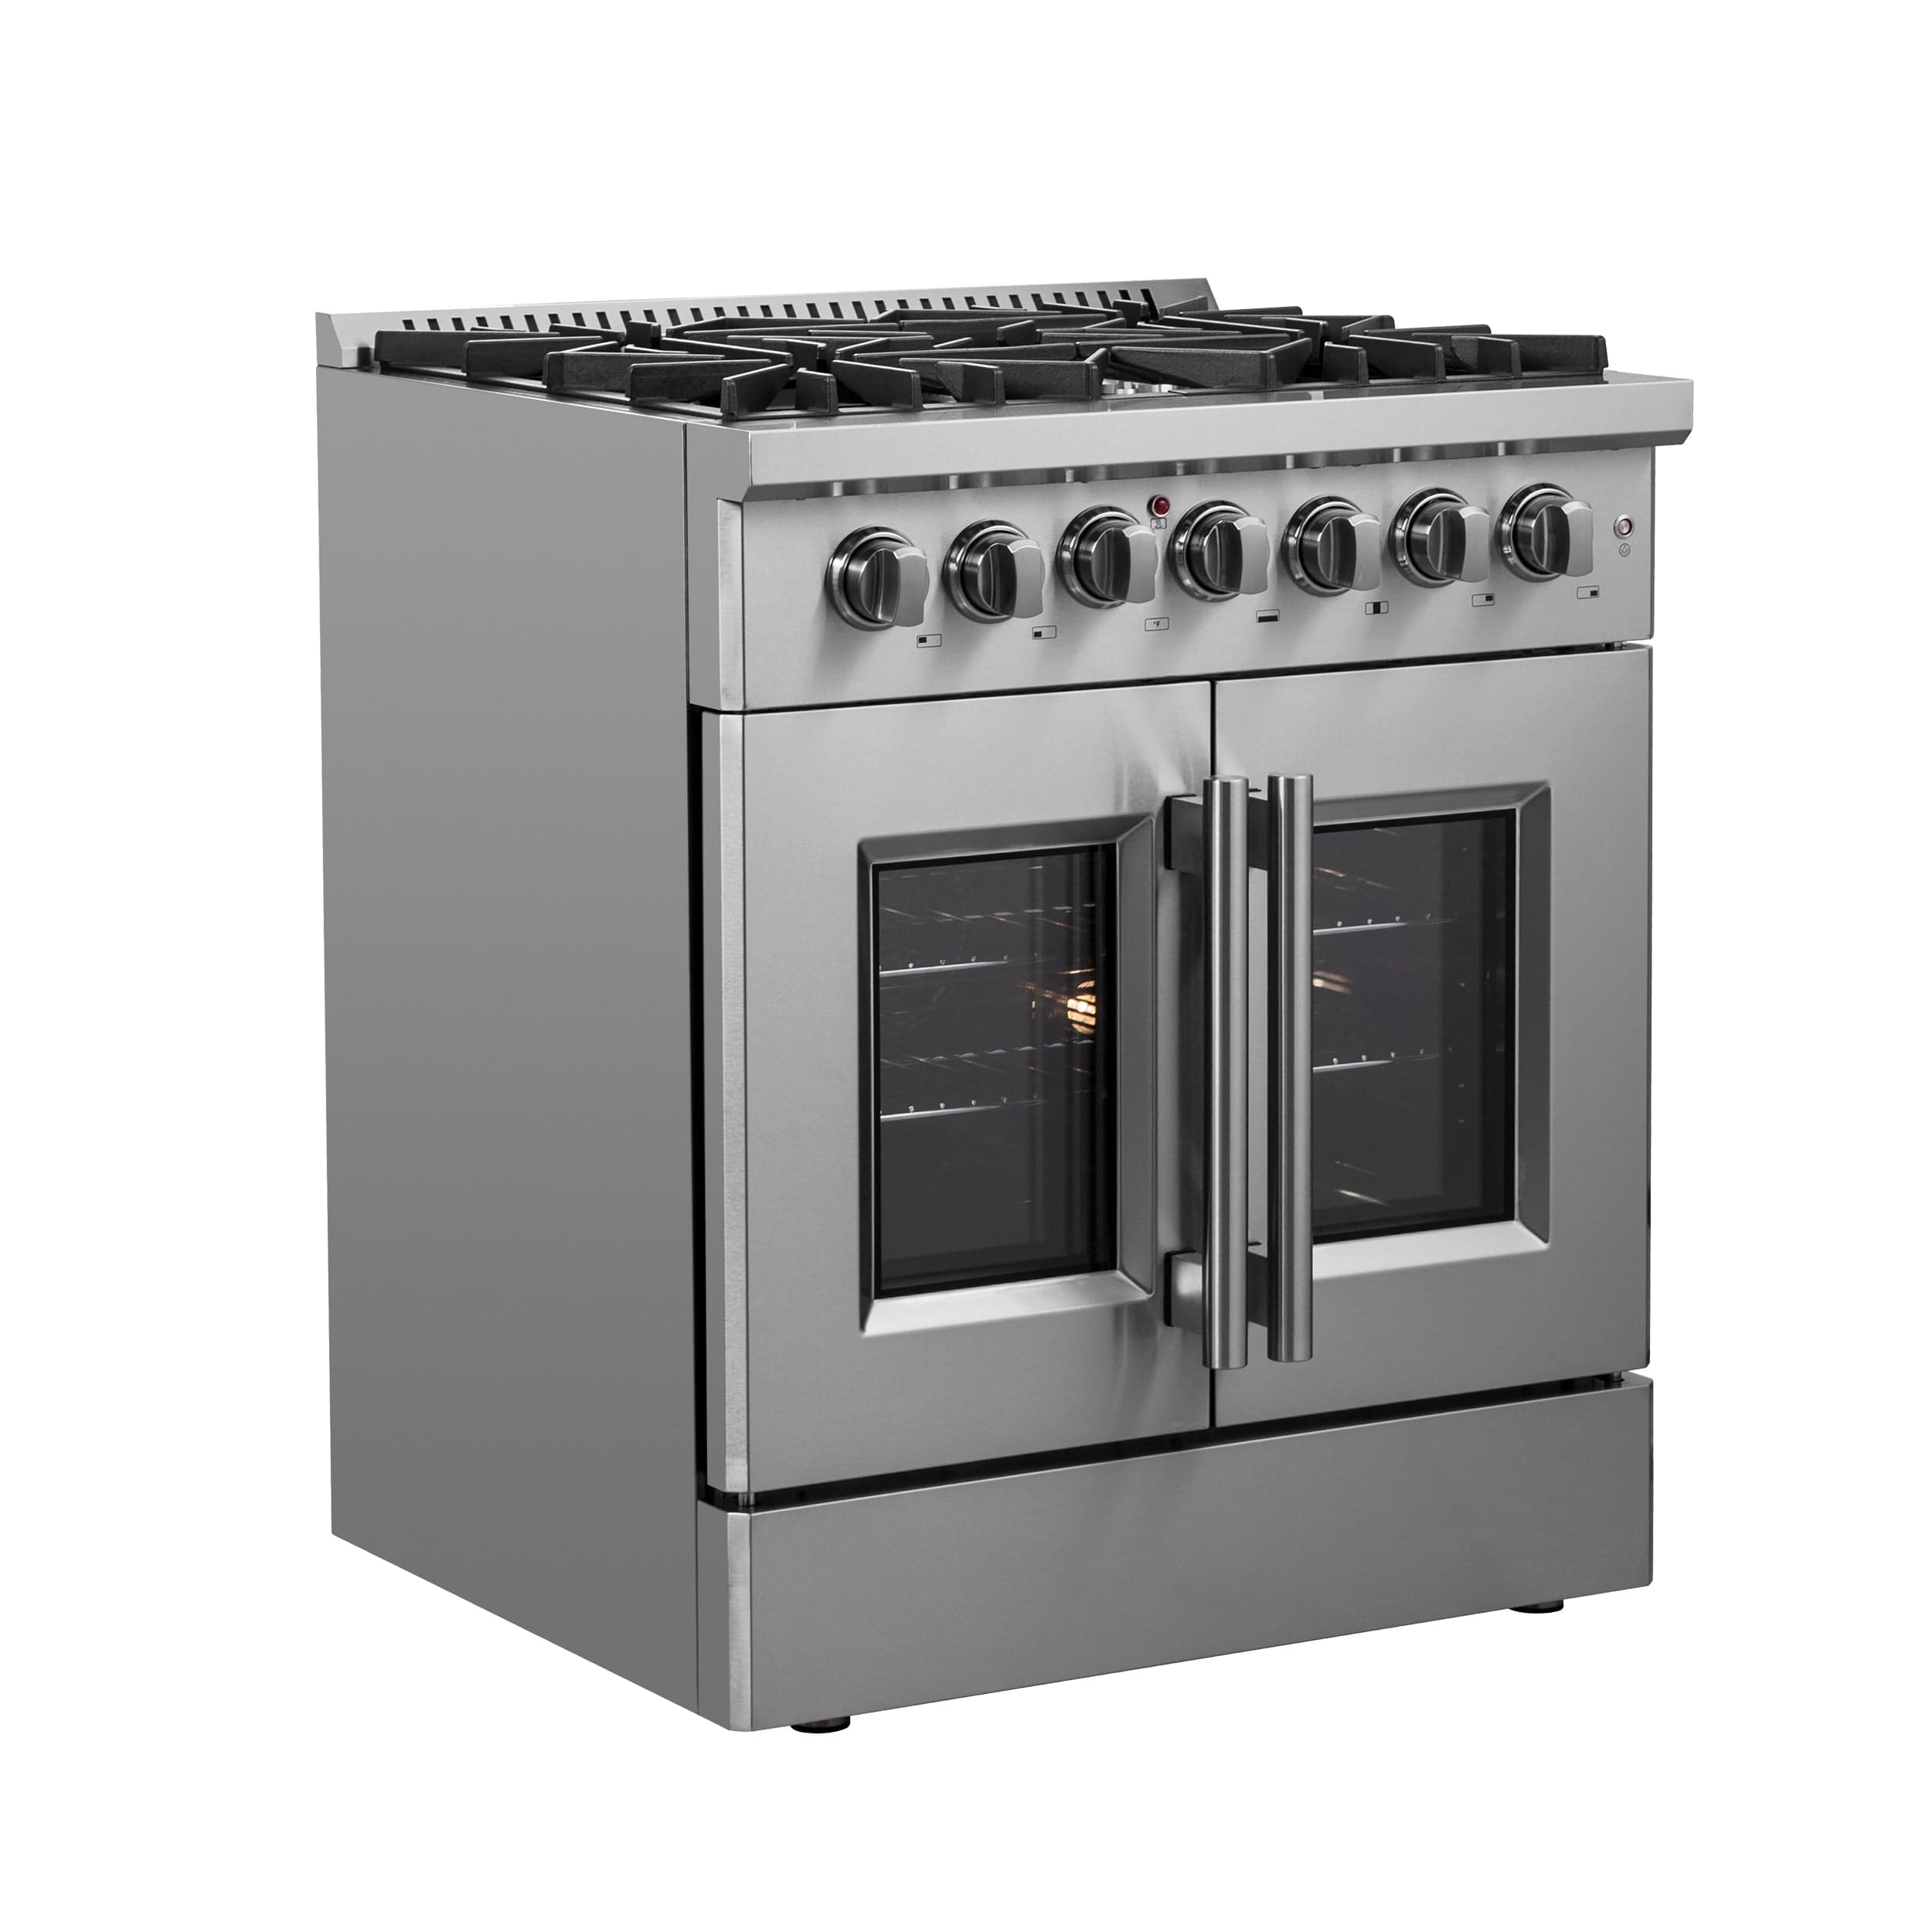 Forno 30" Gas Burner, Electric Oven Range With French Door in Stainless Steel, FFSGS6356-30 Range FFSGS6356-30 Luxury Appliances Direct